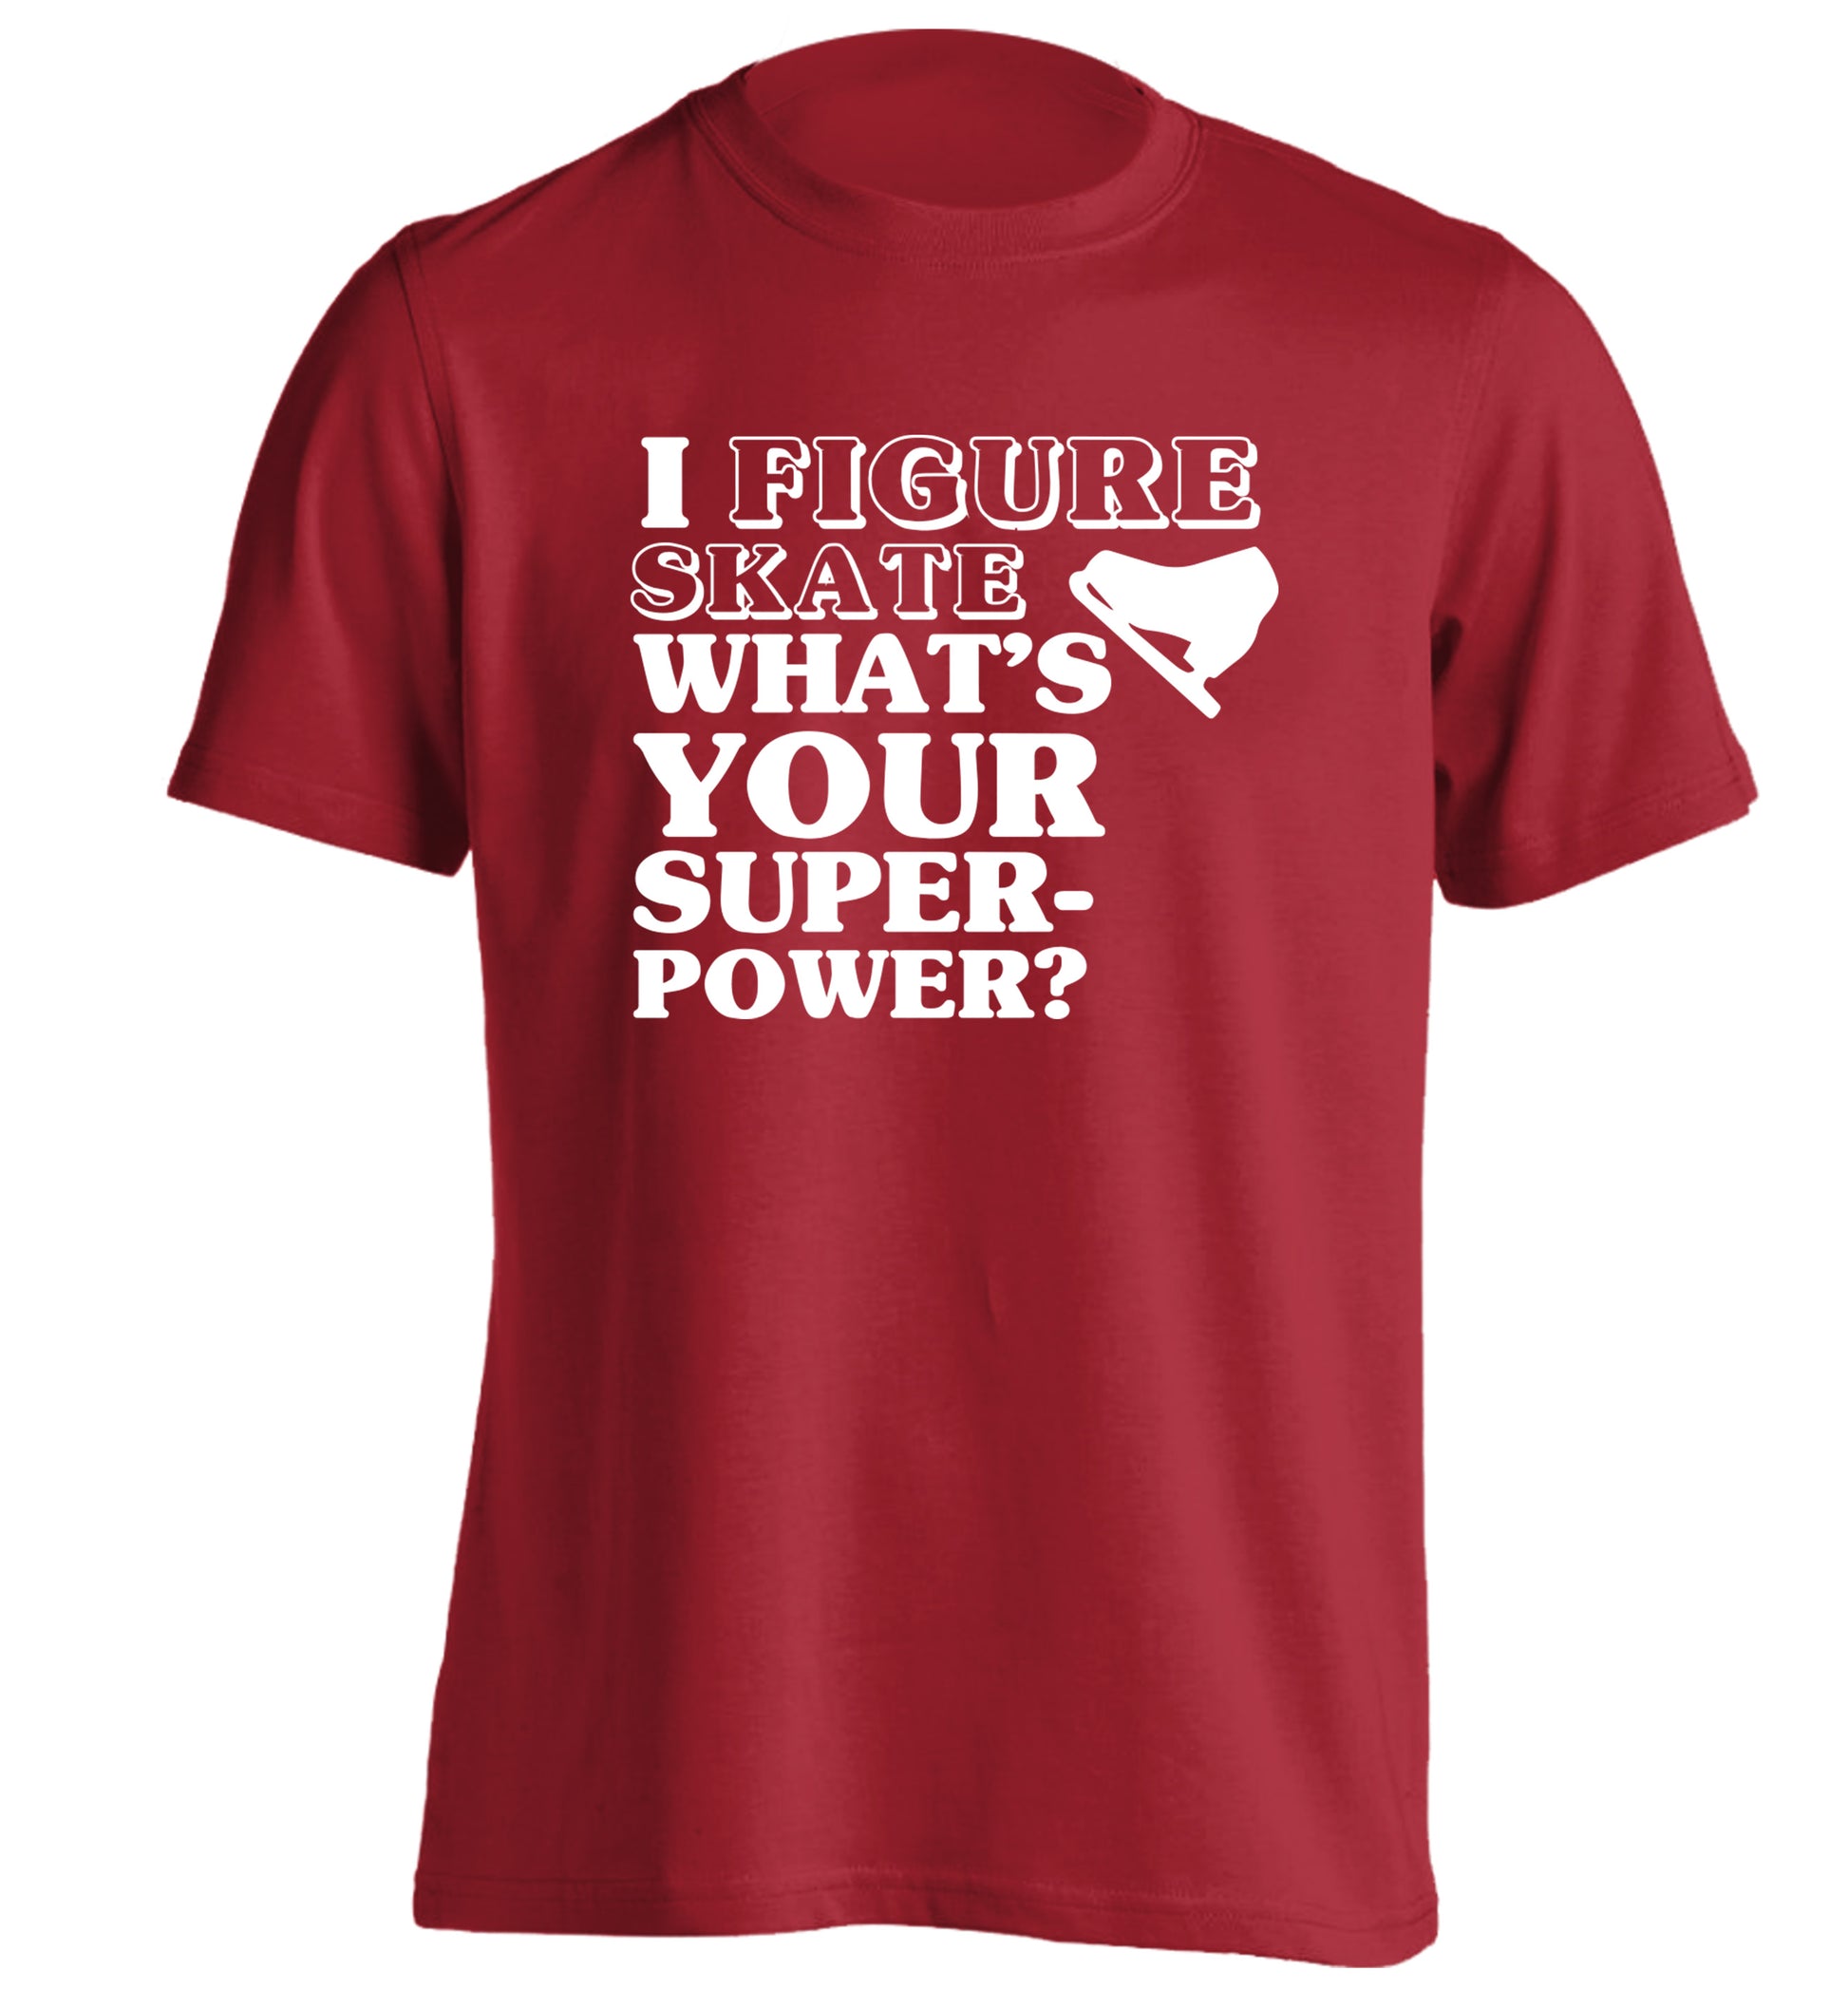 I figure skate what's your superpower? adults unisexred Tshirt 2XL